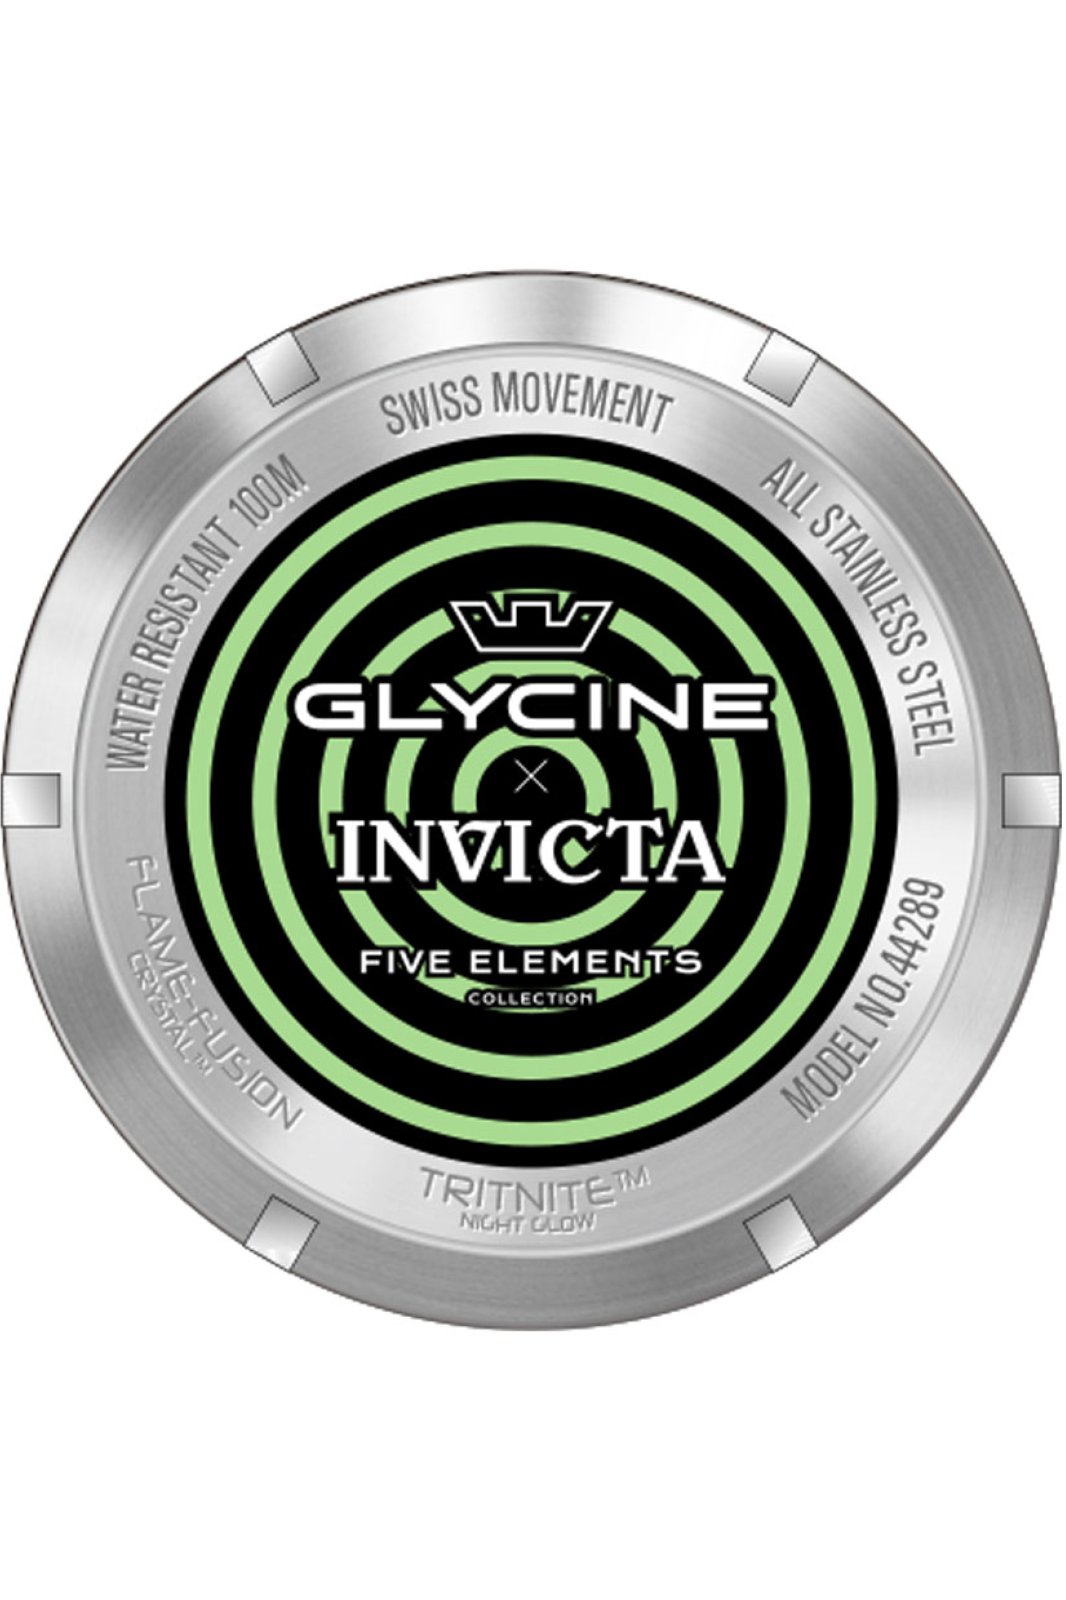 Glycine x Invicta Watch Five Elements - Wood 44289 - Official Glycine x  Invicta Store - Buy Online!